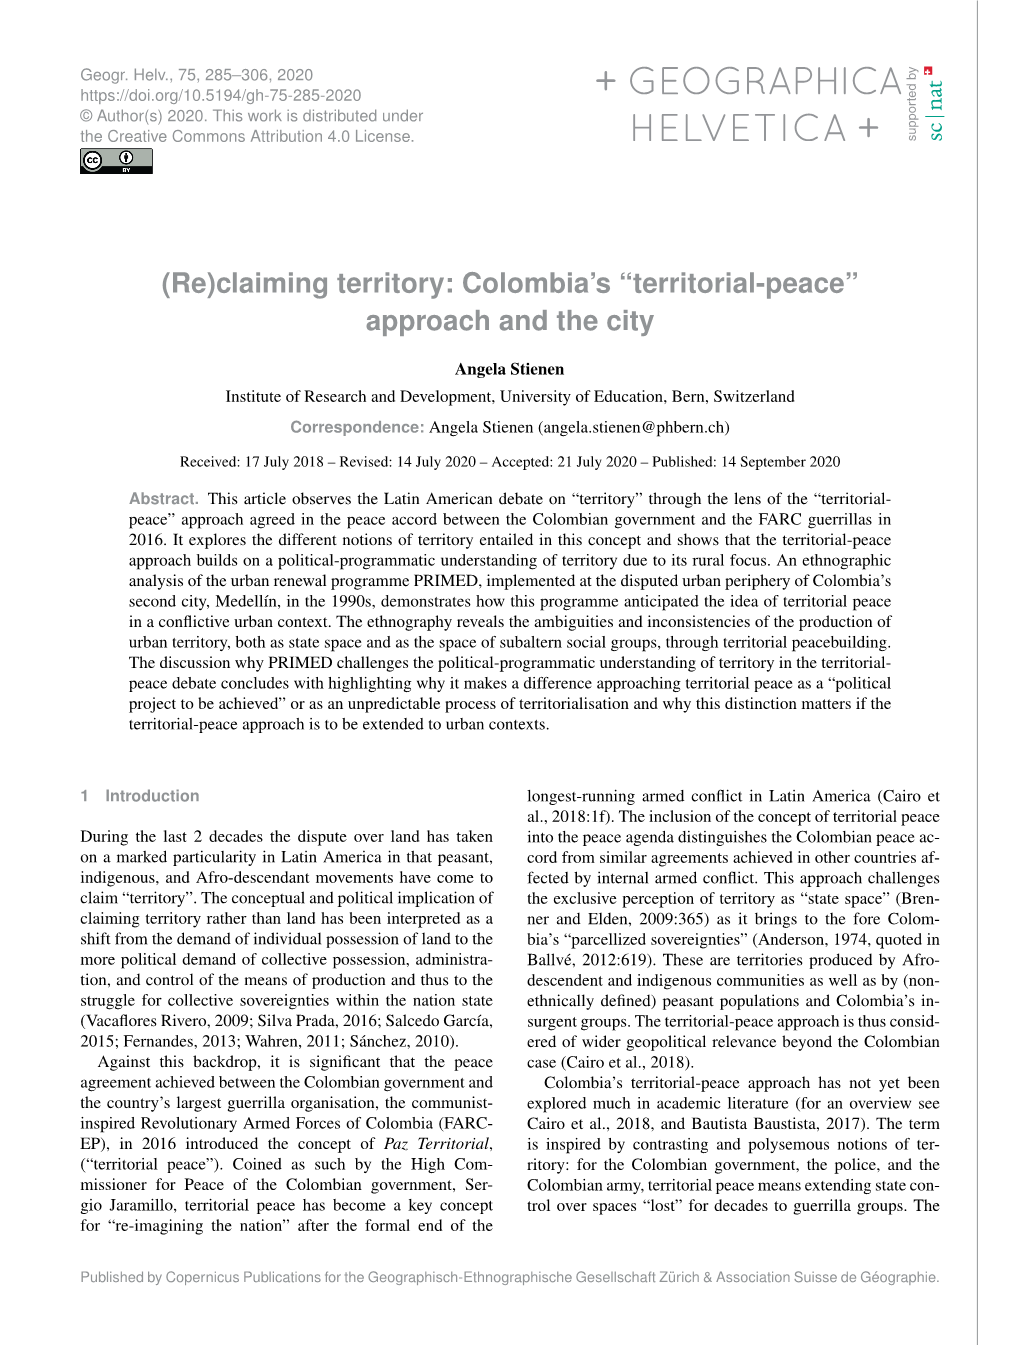 Colombia's “Territorial-Peace” Approach and the City